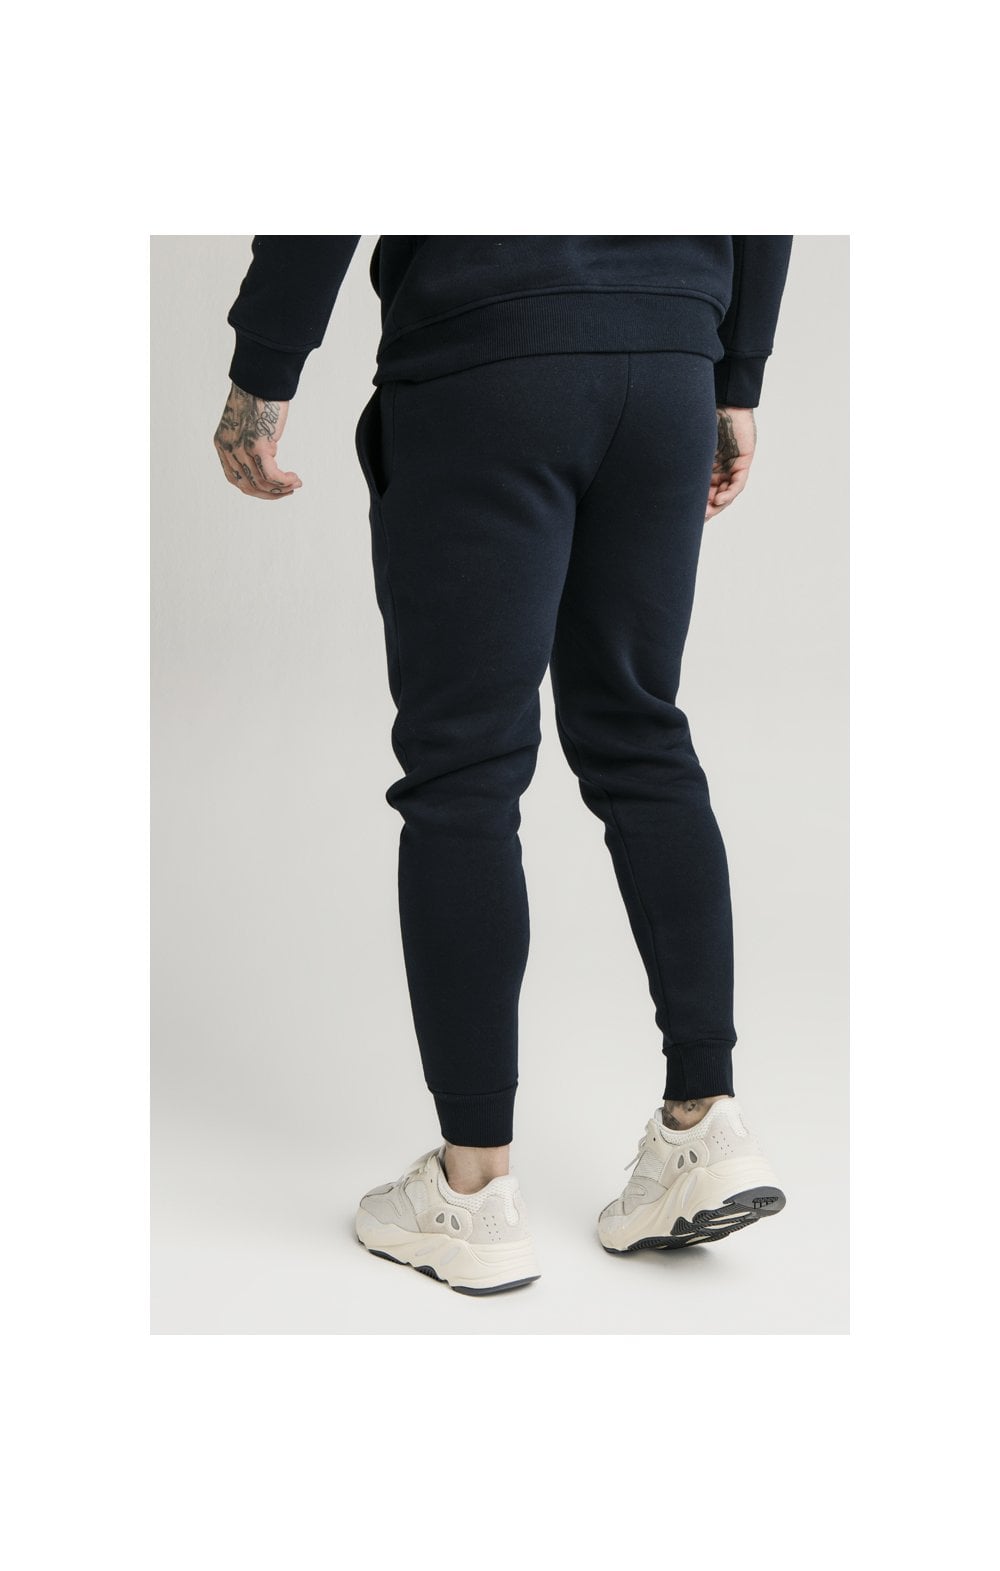 SikSilk Muscle Fit Jogger – Navy (3)